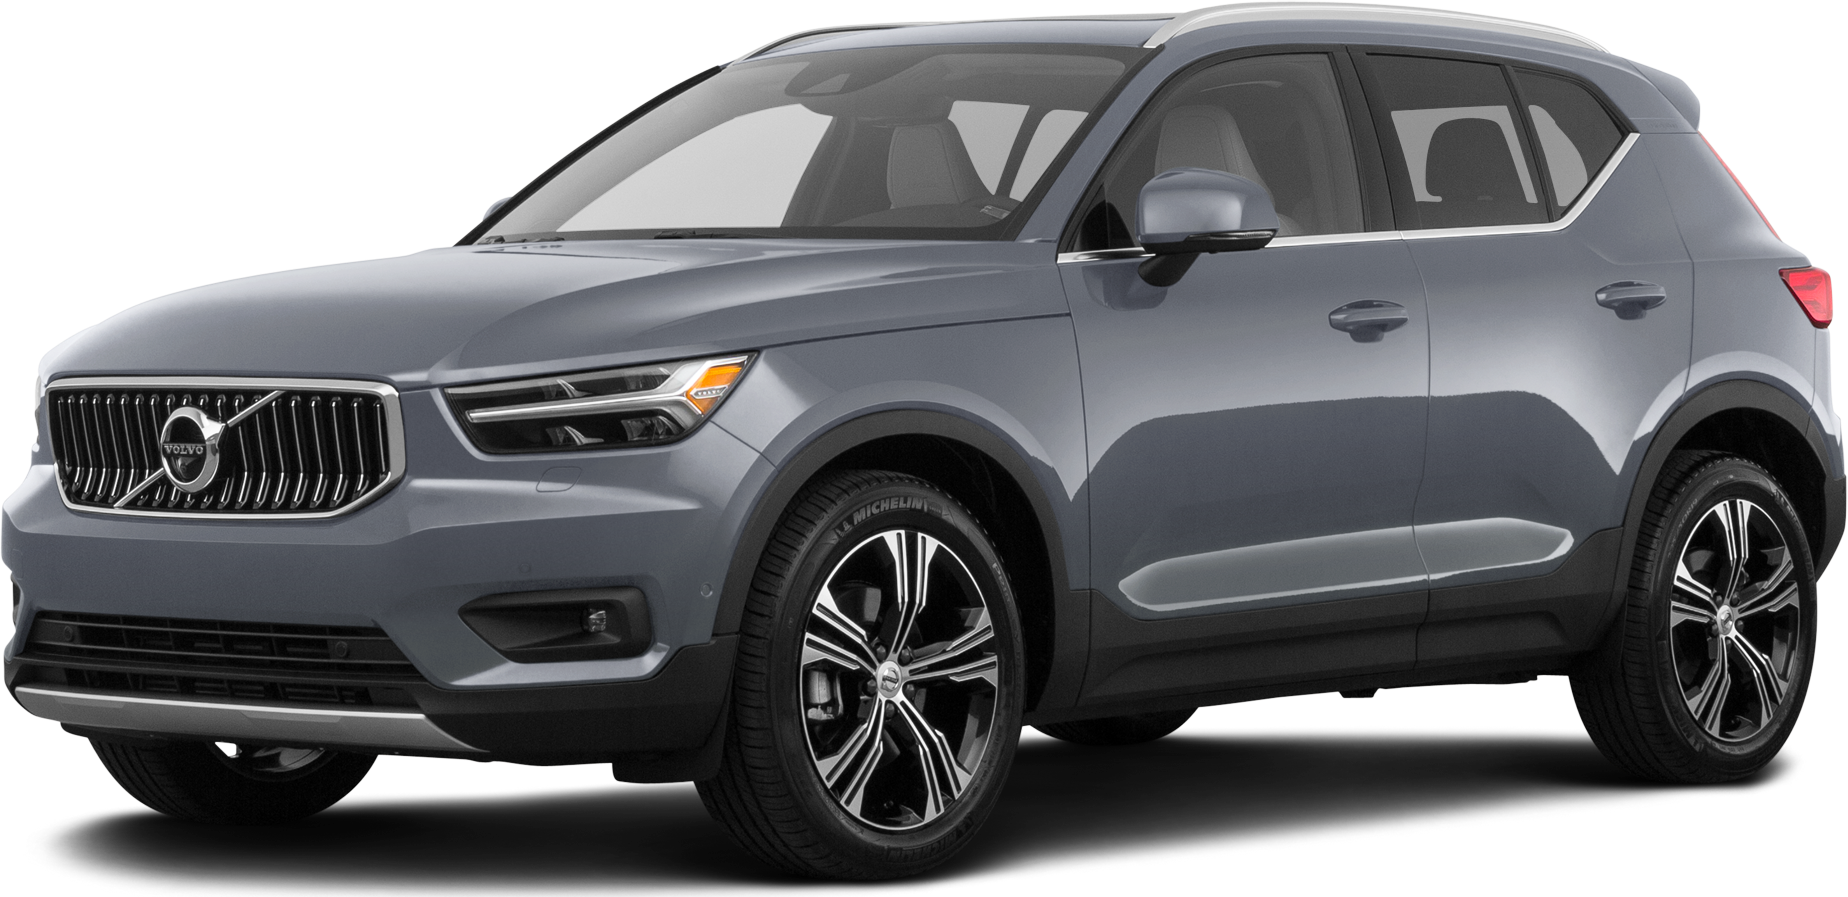 https://file.kelleybluebookimages.com/kbb/base/evox/CP/13753/2022-Volvo-XC40-front_13753_032_1848x897_728_cropped.png